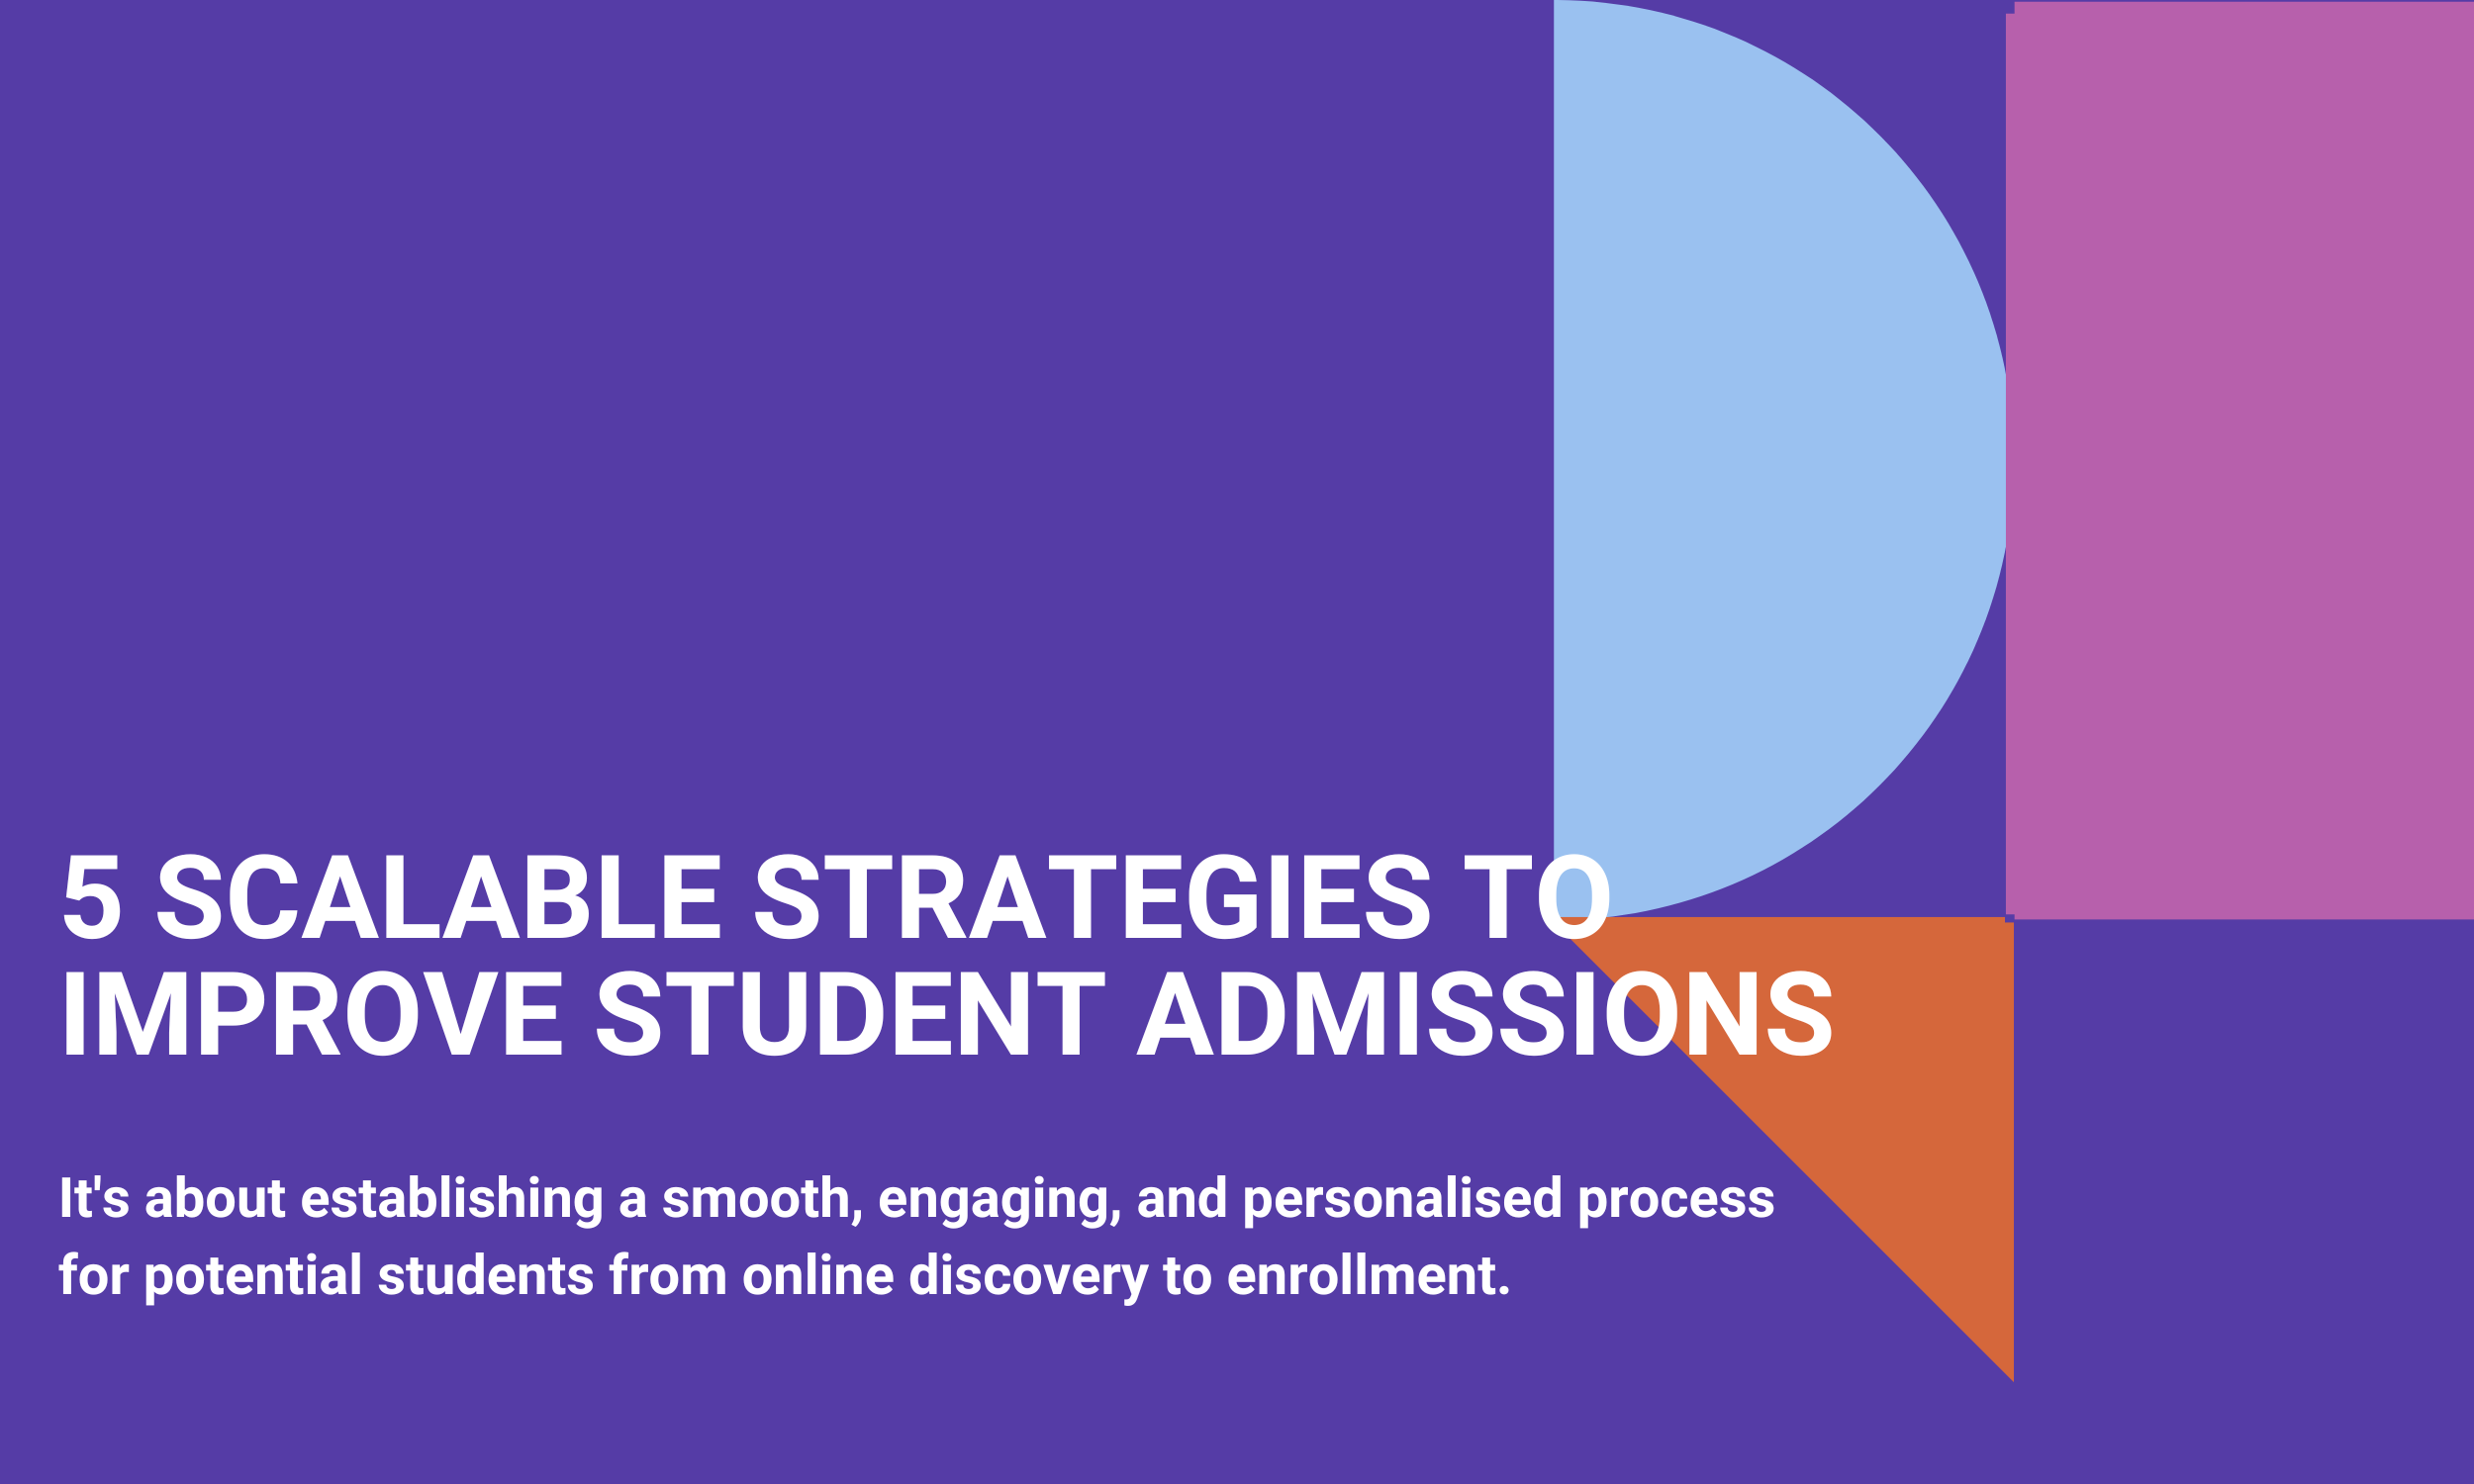 5 Scalable Strategies to Improve Student Admissions